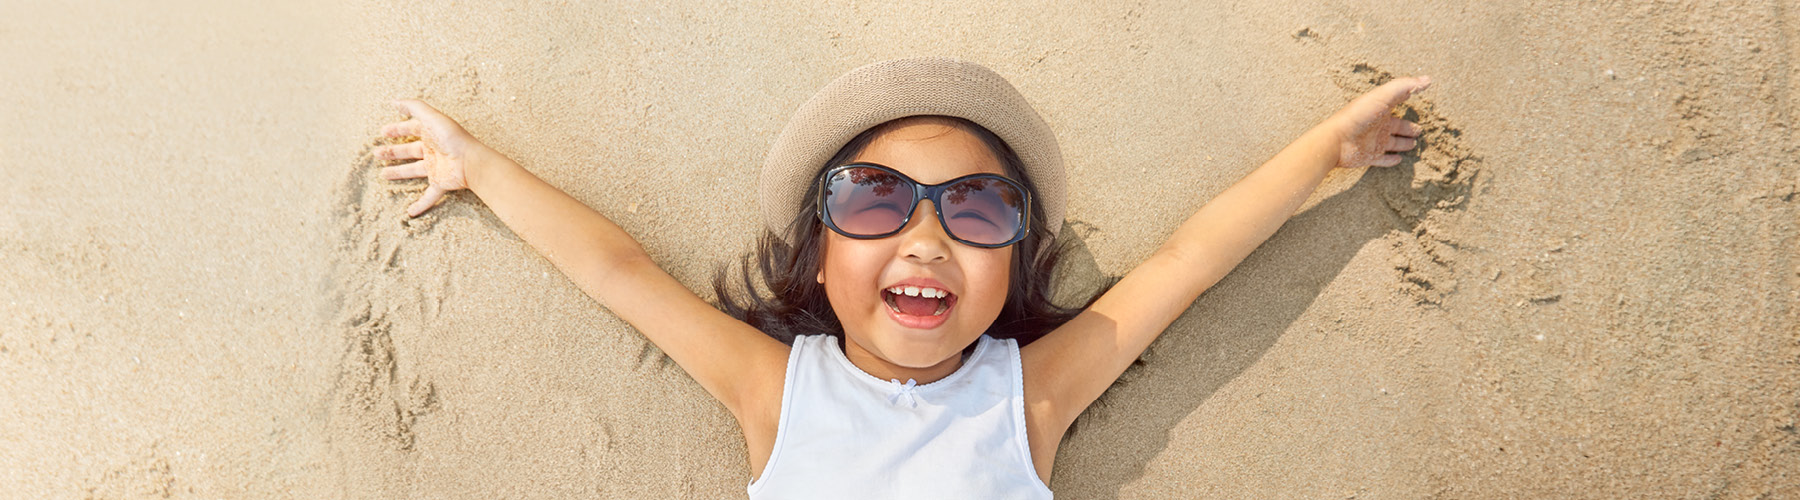 Small girl with sunglasses and hat laying on sandy beach